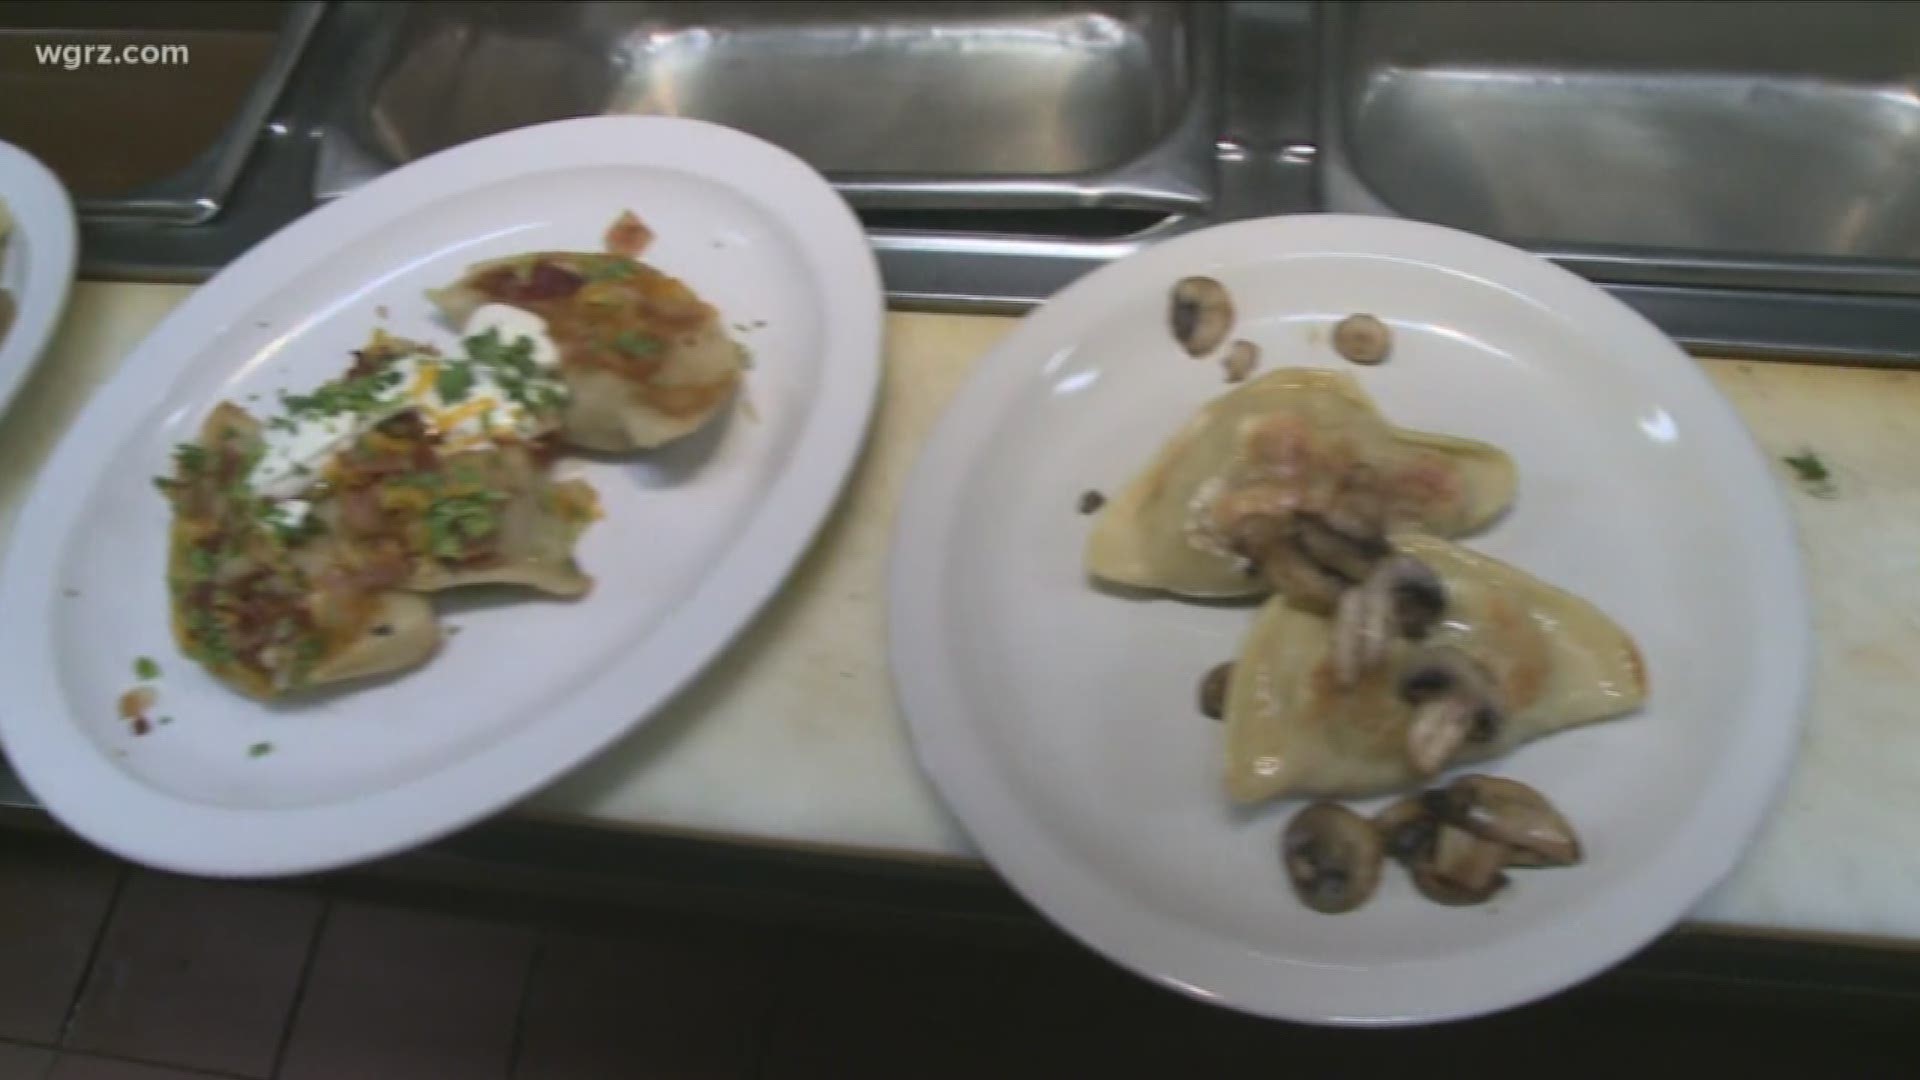 THE car wash on Main Street in Buffalo serving up three kinds of hot pierogis.